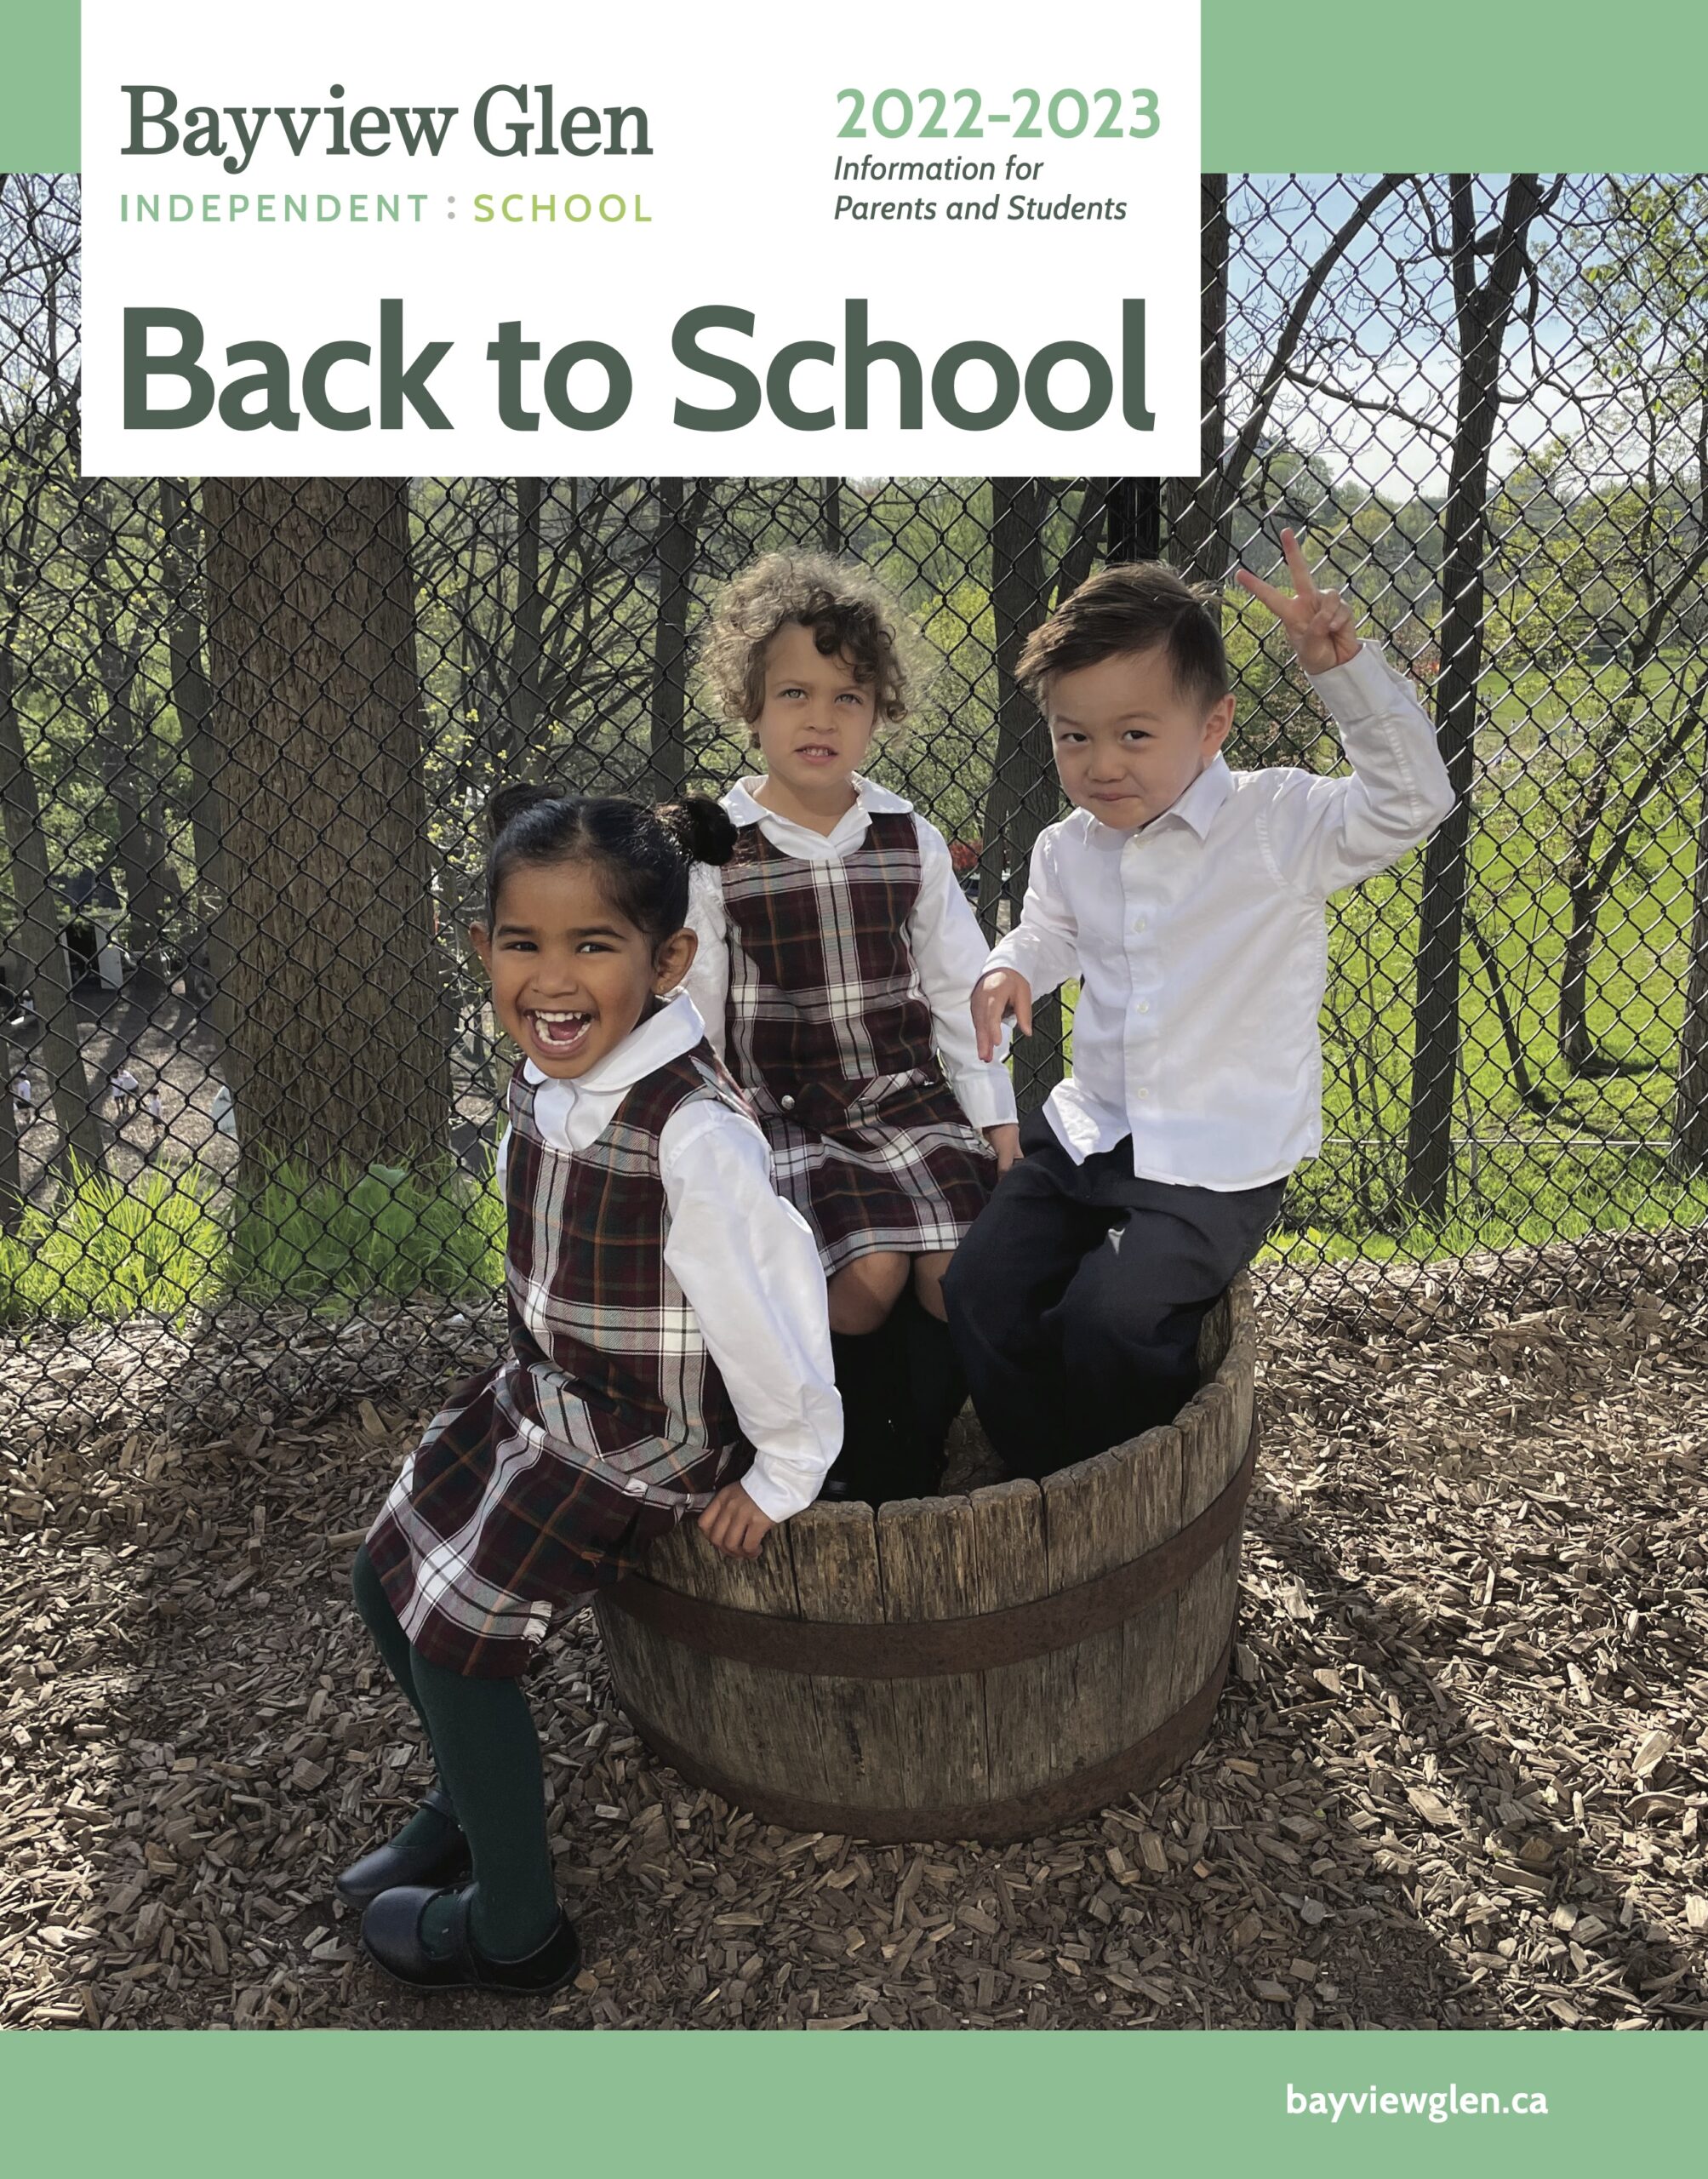 Back to School 2022-2023 Information